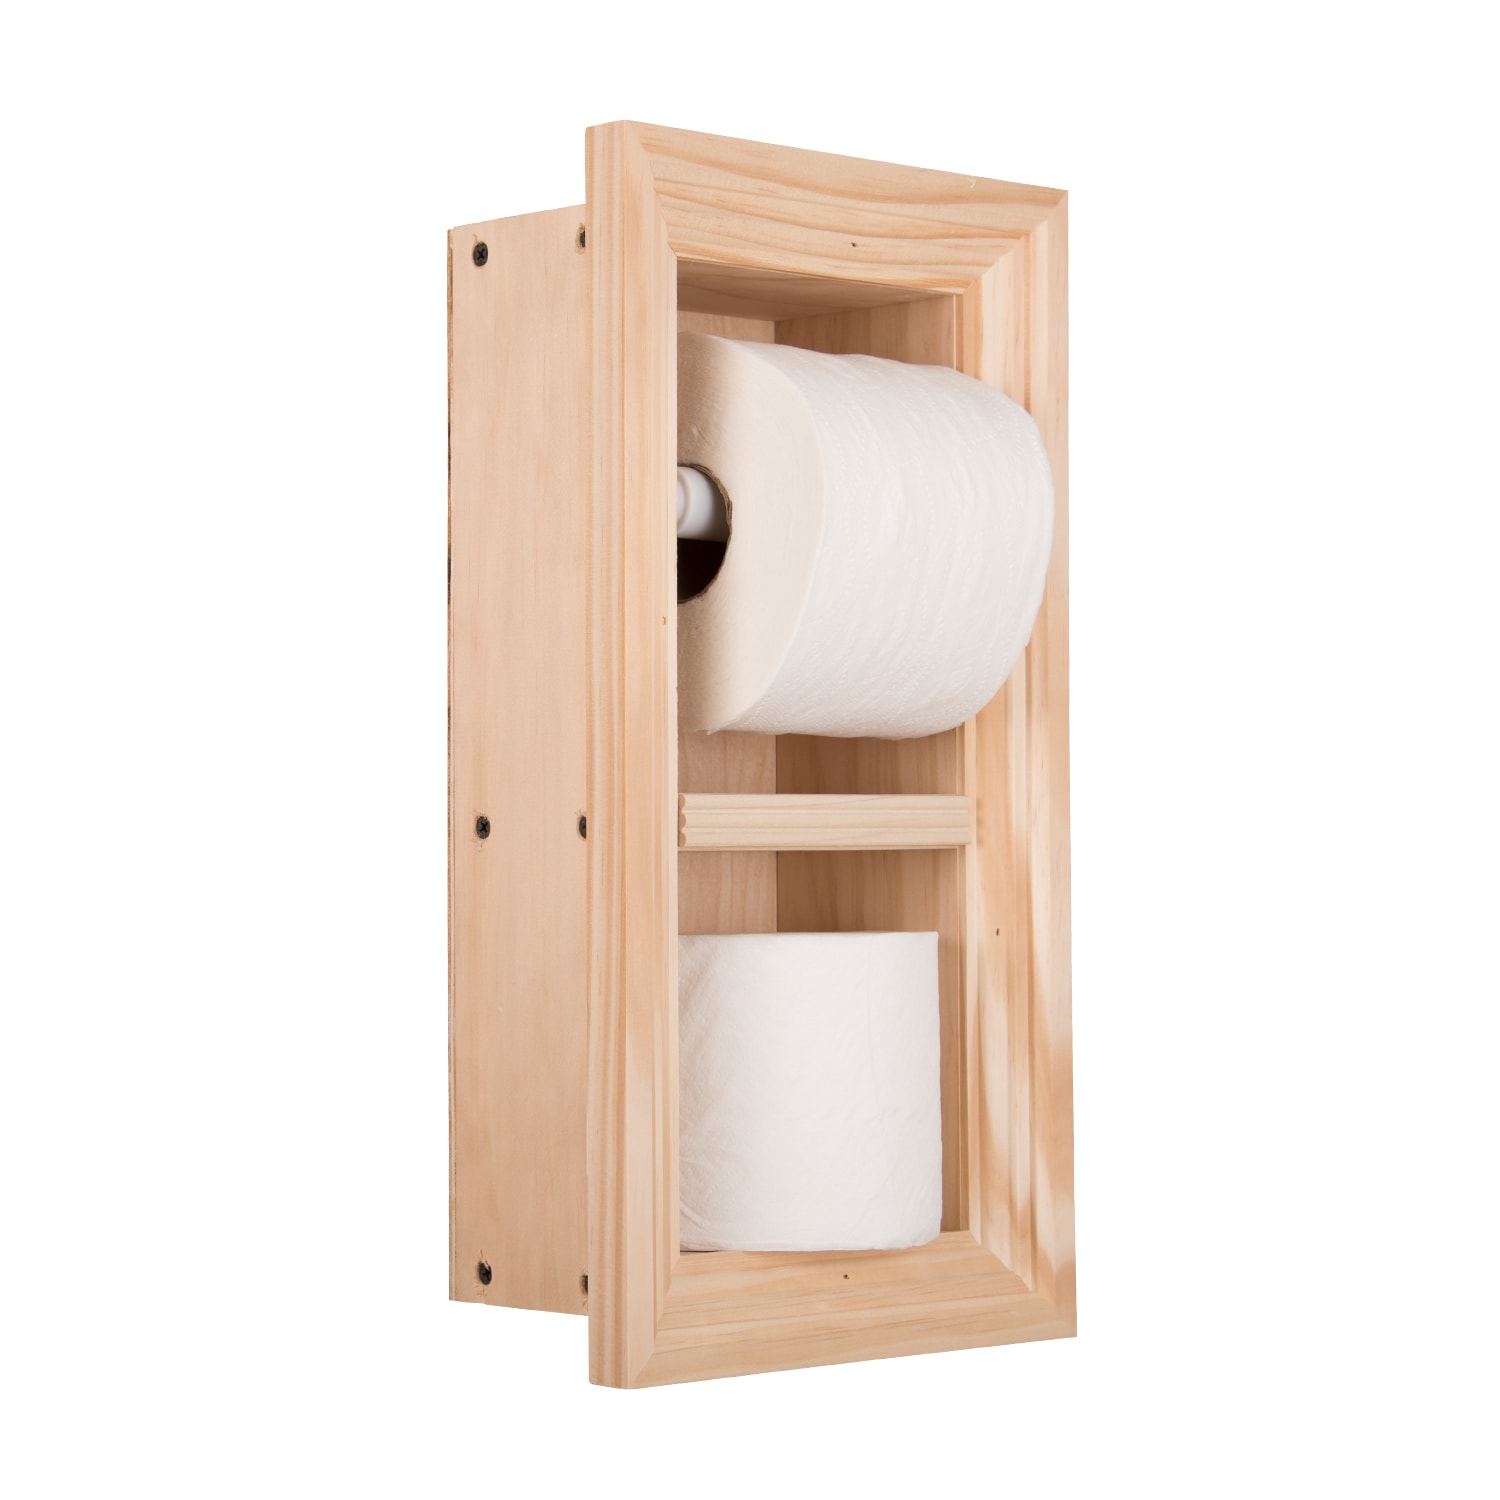 Highlands-19 Solid Wood Recessed in wall Double Toilet Paper holder with  cabinet - 14 x 16.25